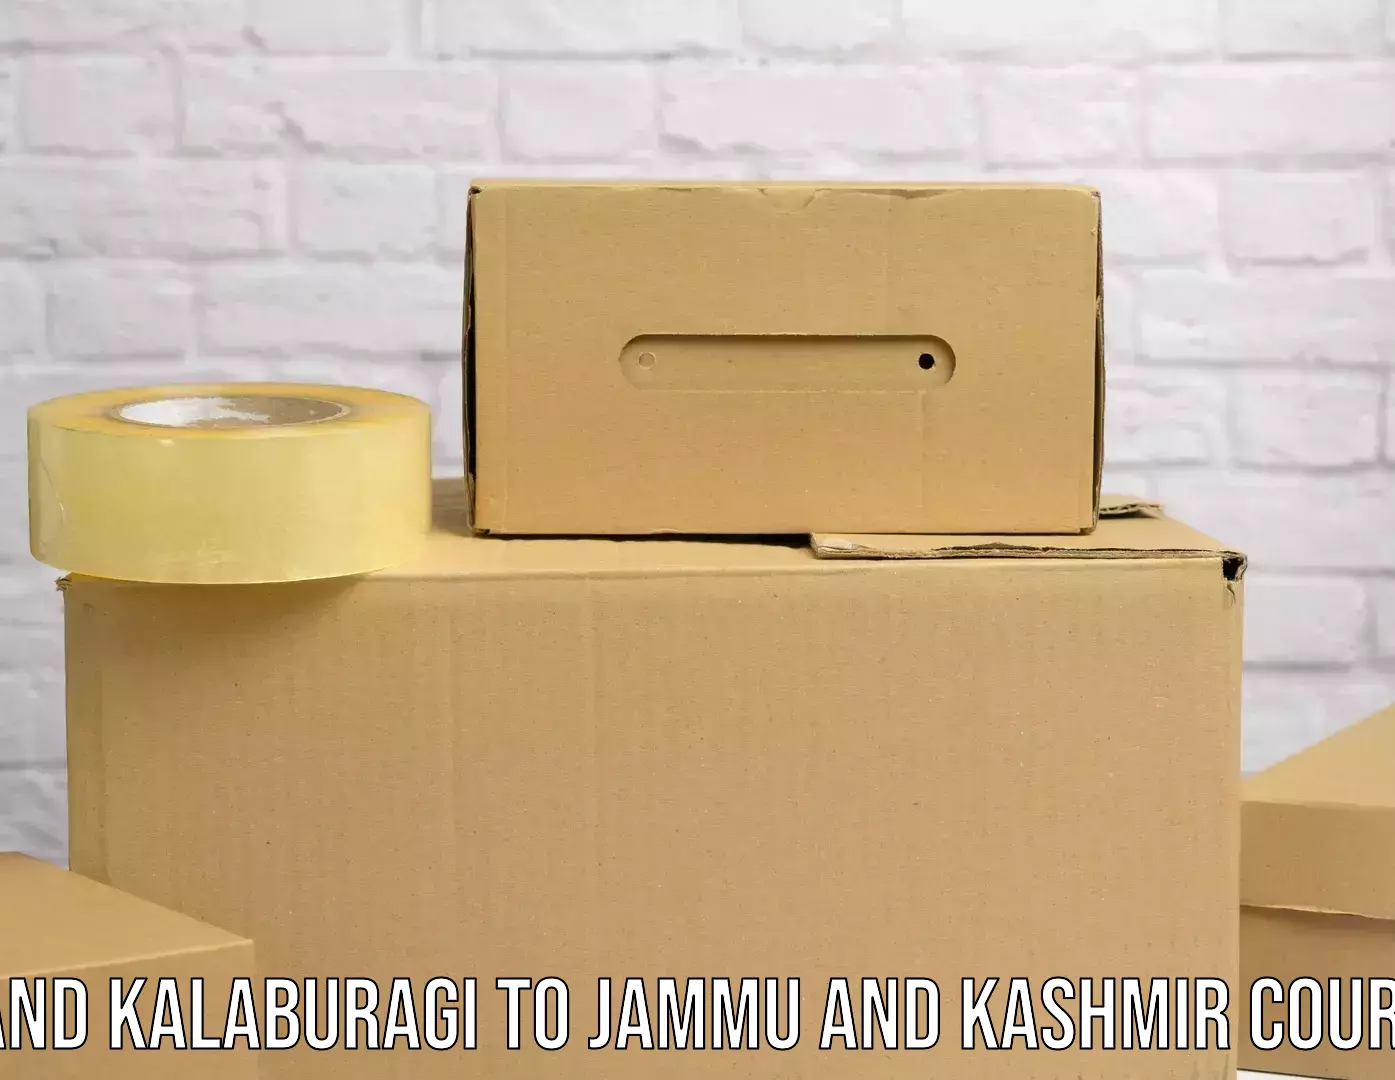 Sustainable delivery practices Aland Kalaburagi to Jammu and Kashmir